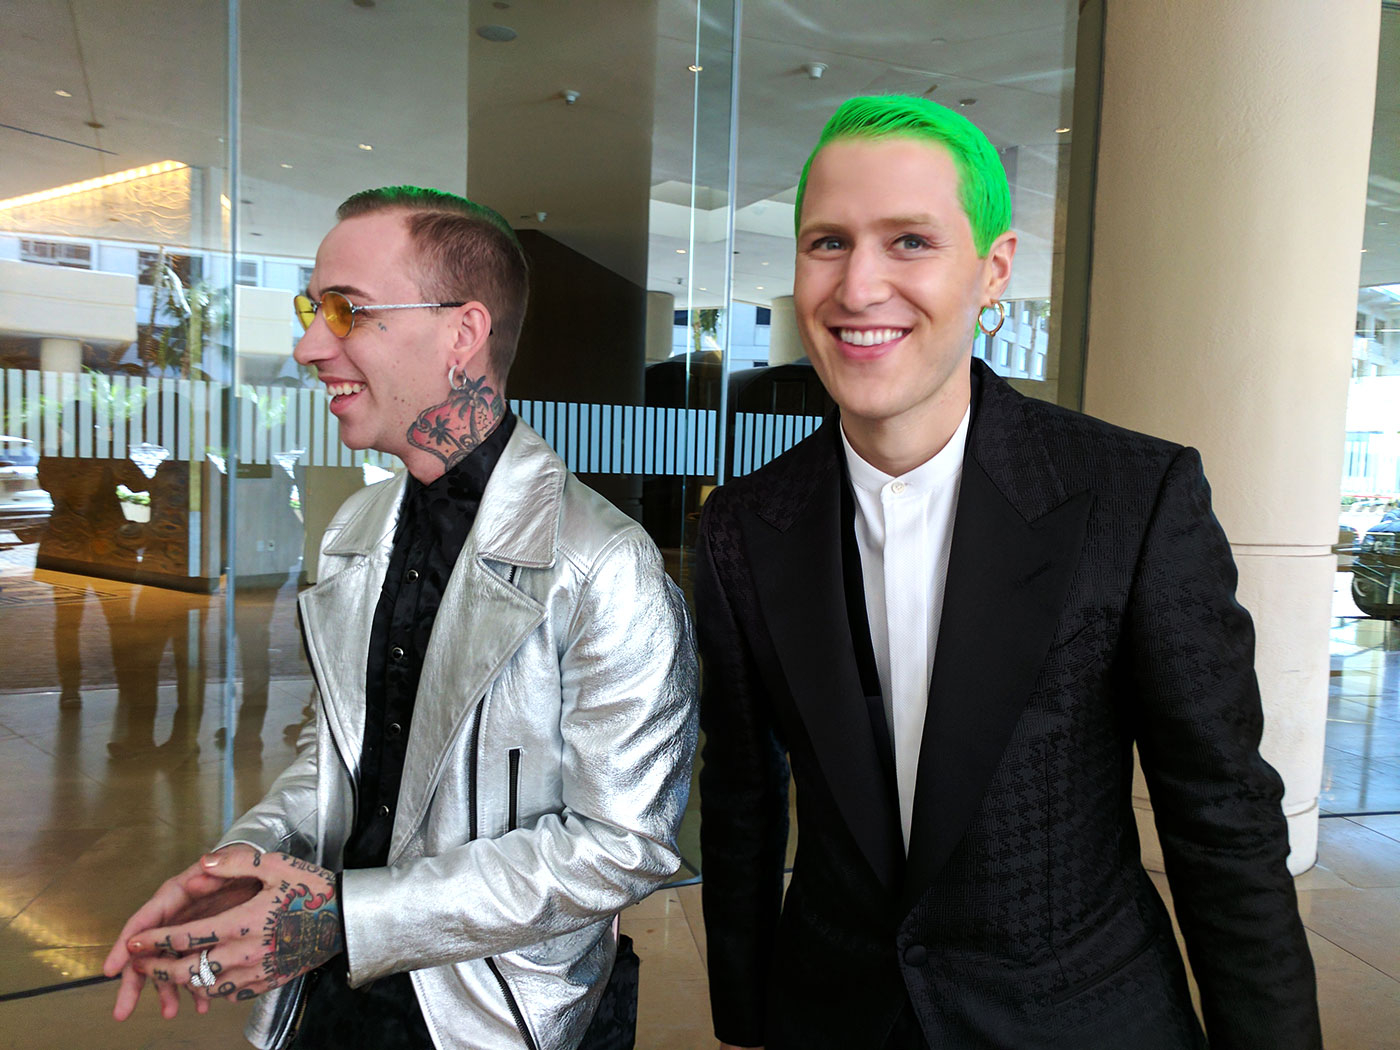 Blackbear and Mike Posner
Photo by the1point8 for Rolling Stone
